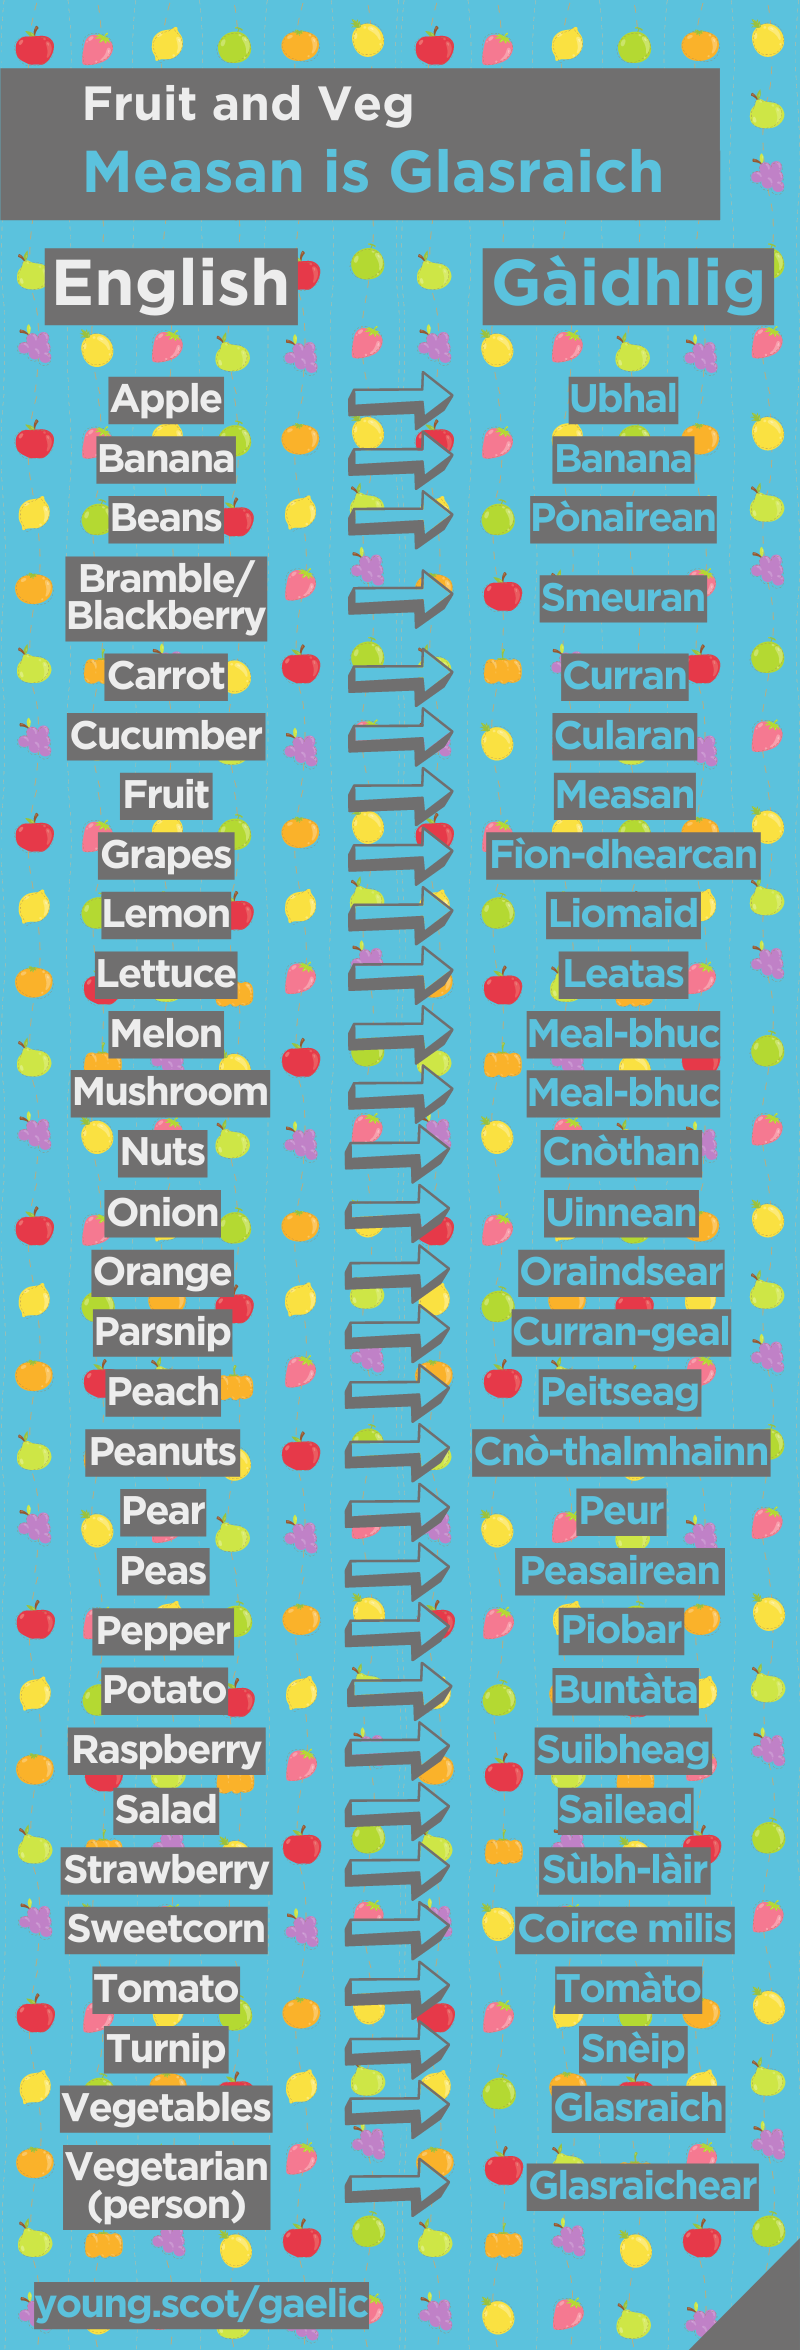 Infographic listing 30 words related to fruit and vegetables. Text version below.